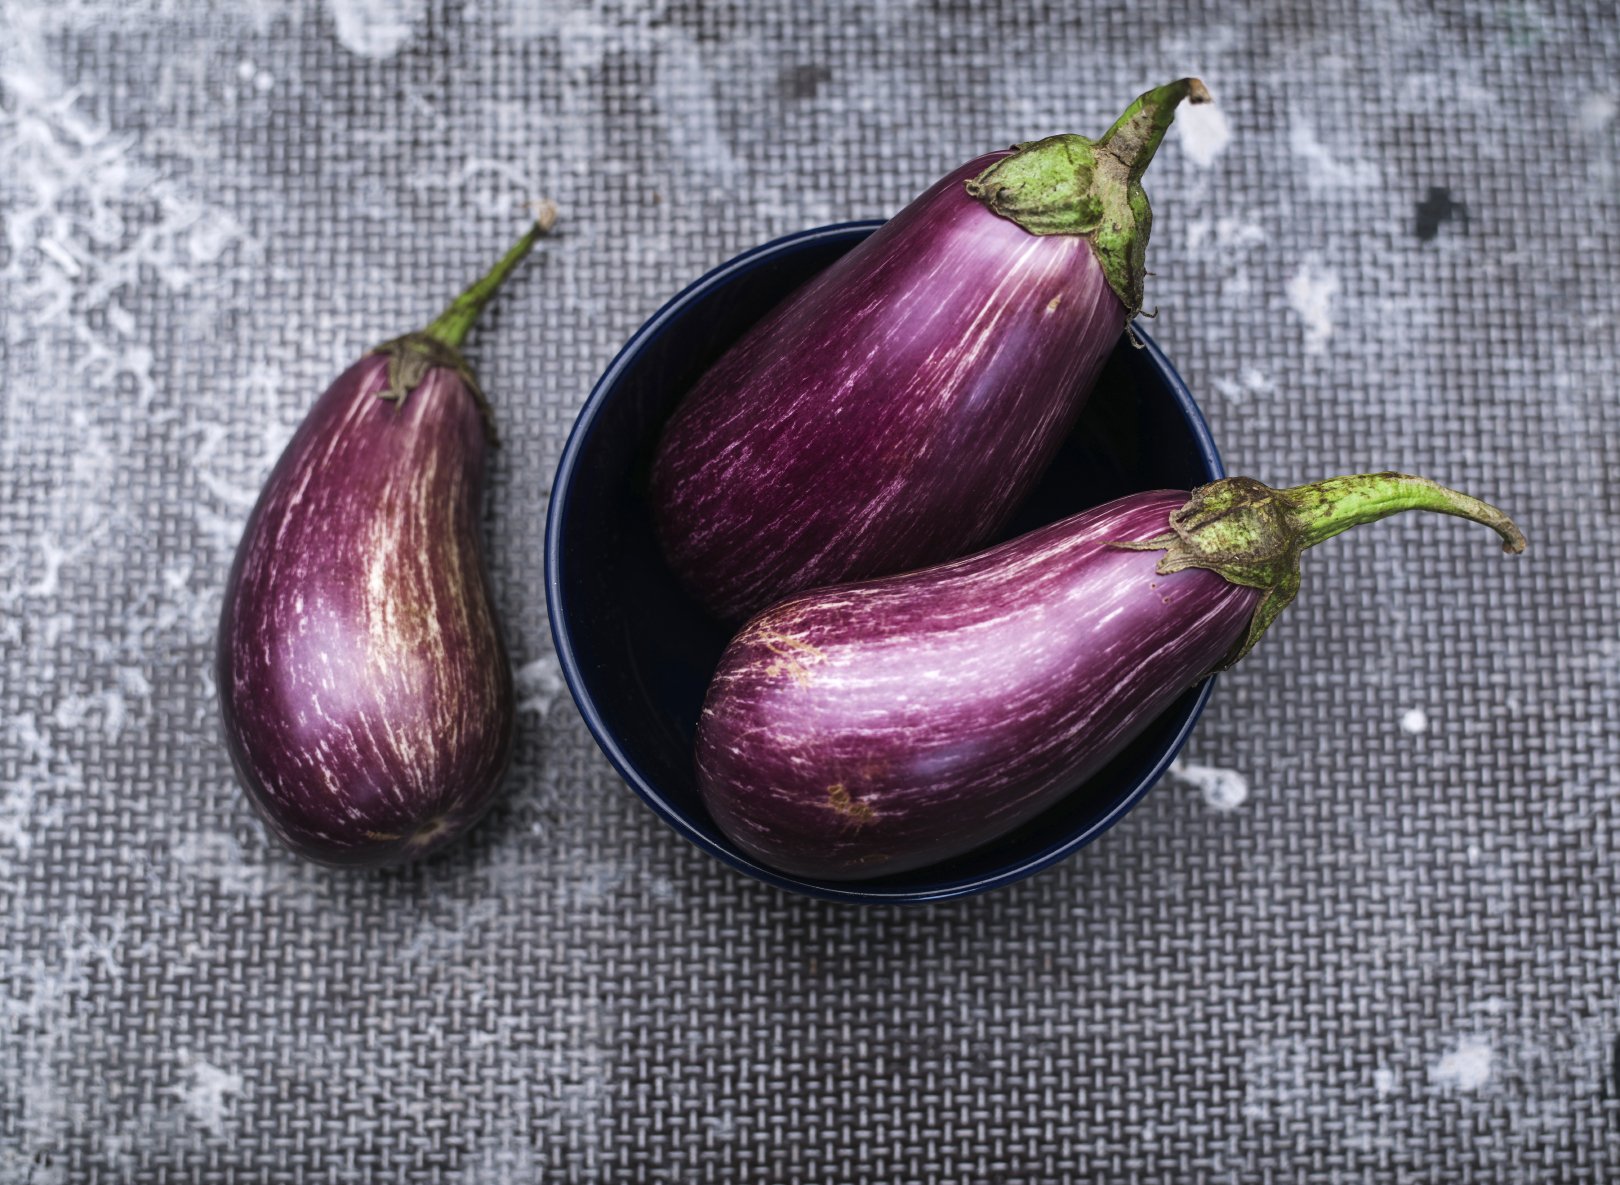 Healthy and delicious purple eggplants on vintage background